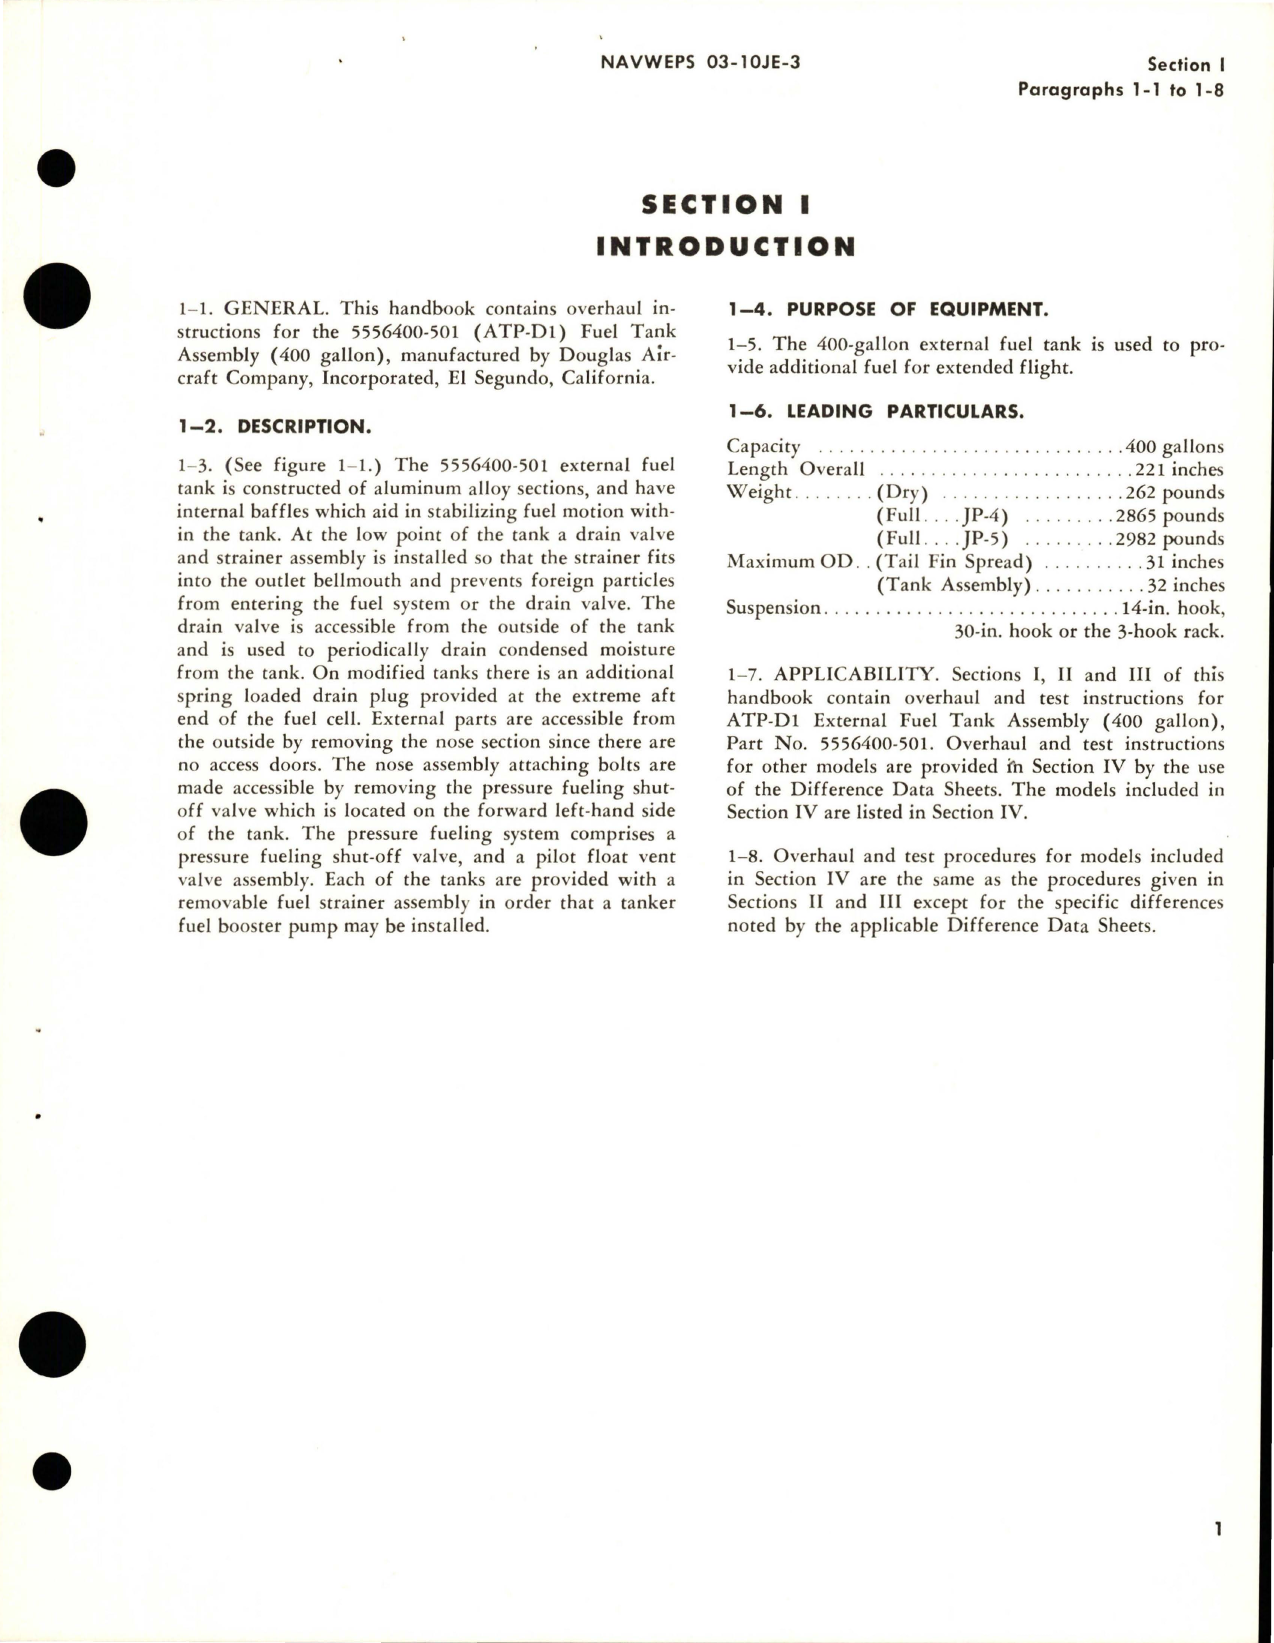 Sample page 5 from AirCorps Library document: Overhaul Instructions for Fuel Tank Assembly - 400 Gallon - Parts 5556400 and 5556400-501